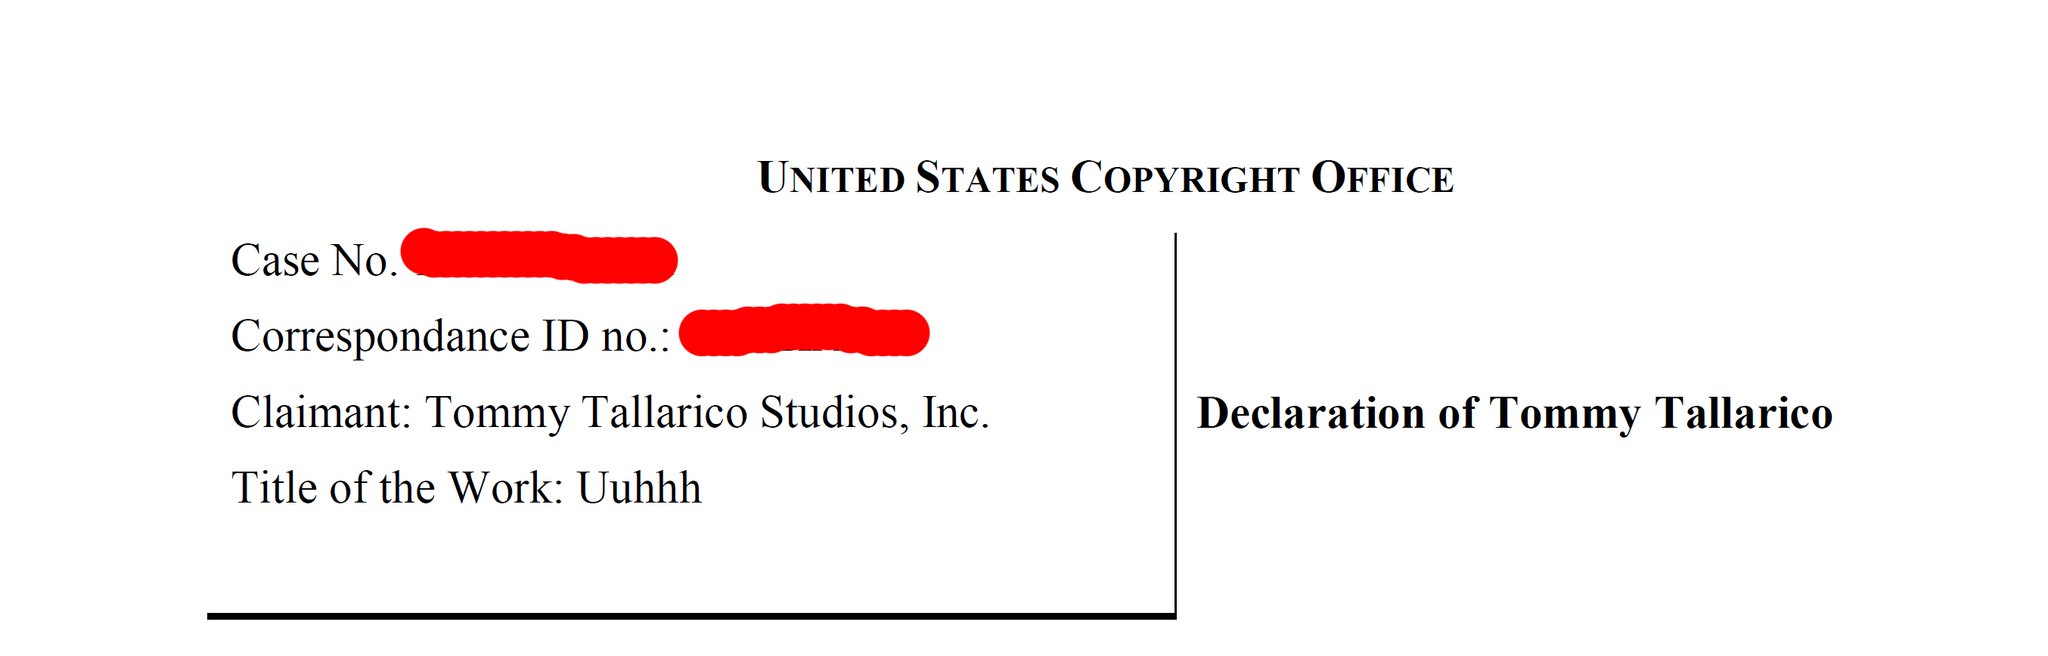 Tommytallarico Auf Twitter For Those Saying The Oof Aka Uuhhh Sound Hasn T Been Registered It Has Roblox Saying Tommy Has No Copyright To The Oof Sound Is Factually Not True As Defined